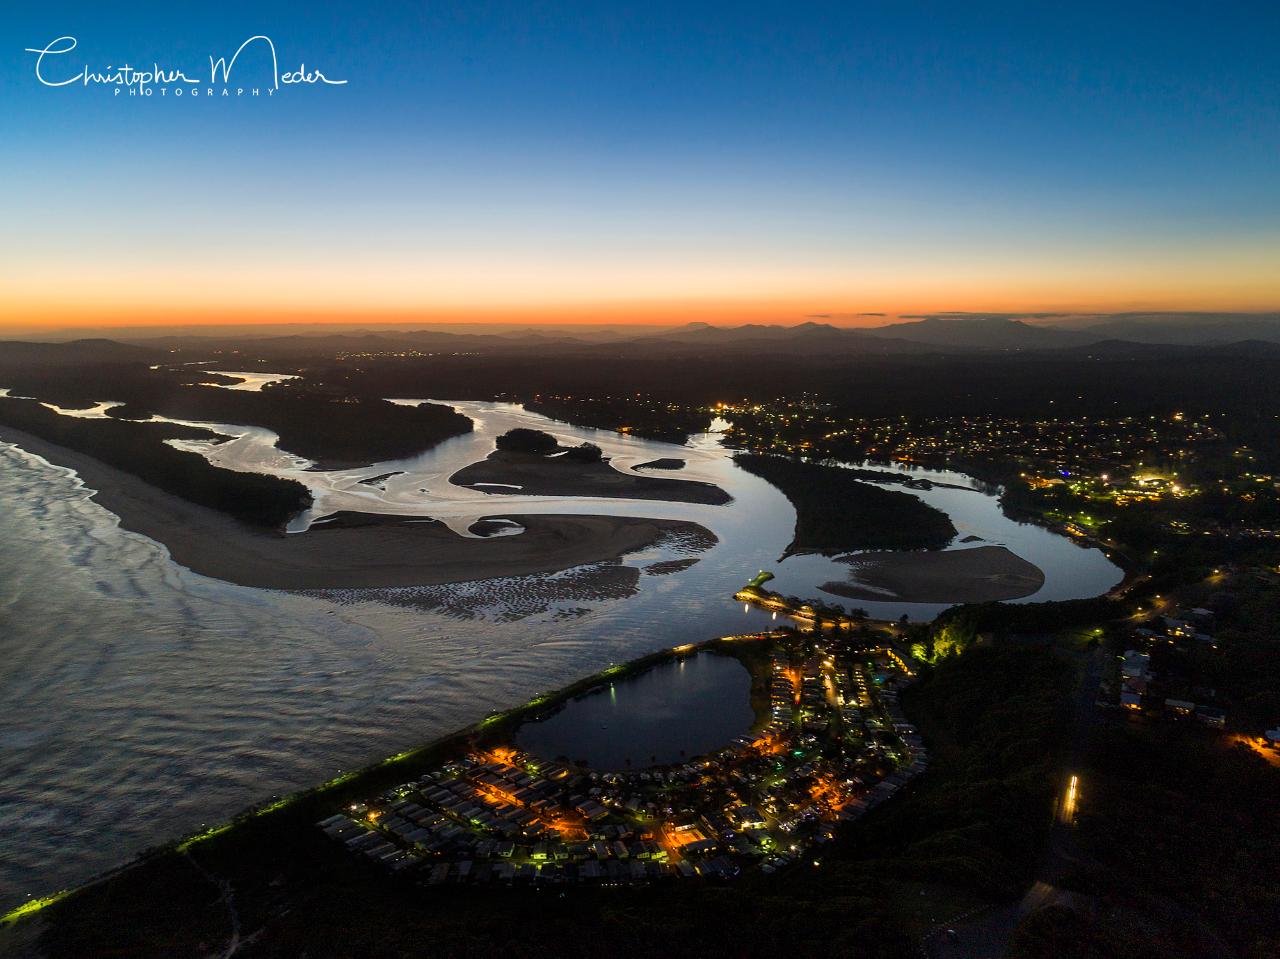 Aerial photography, drone photography by Meder Photography Pty Ltd